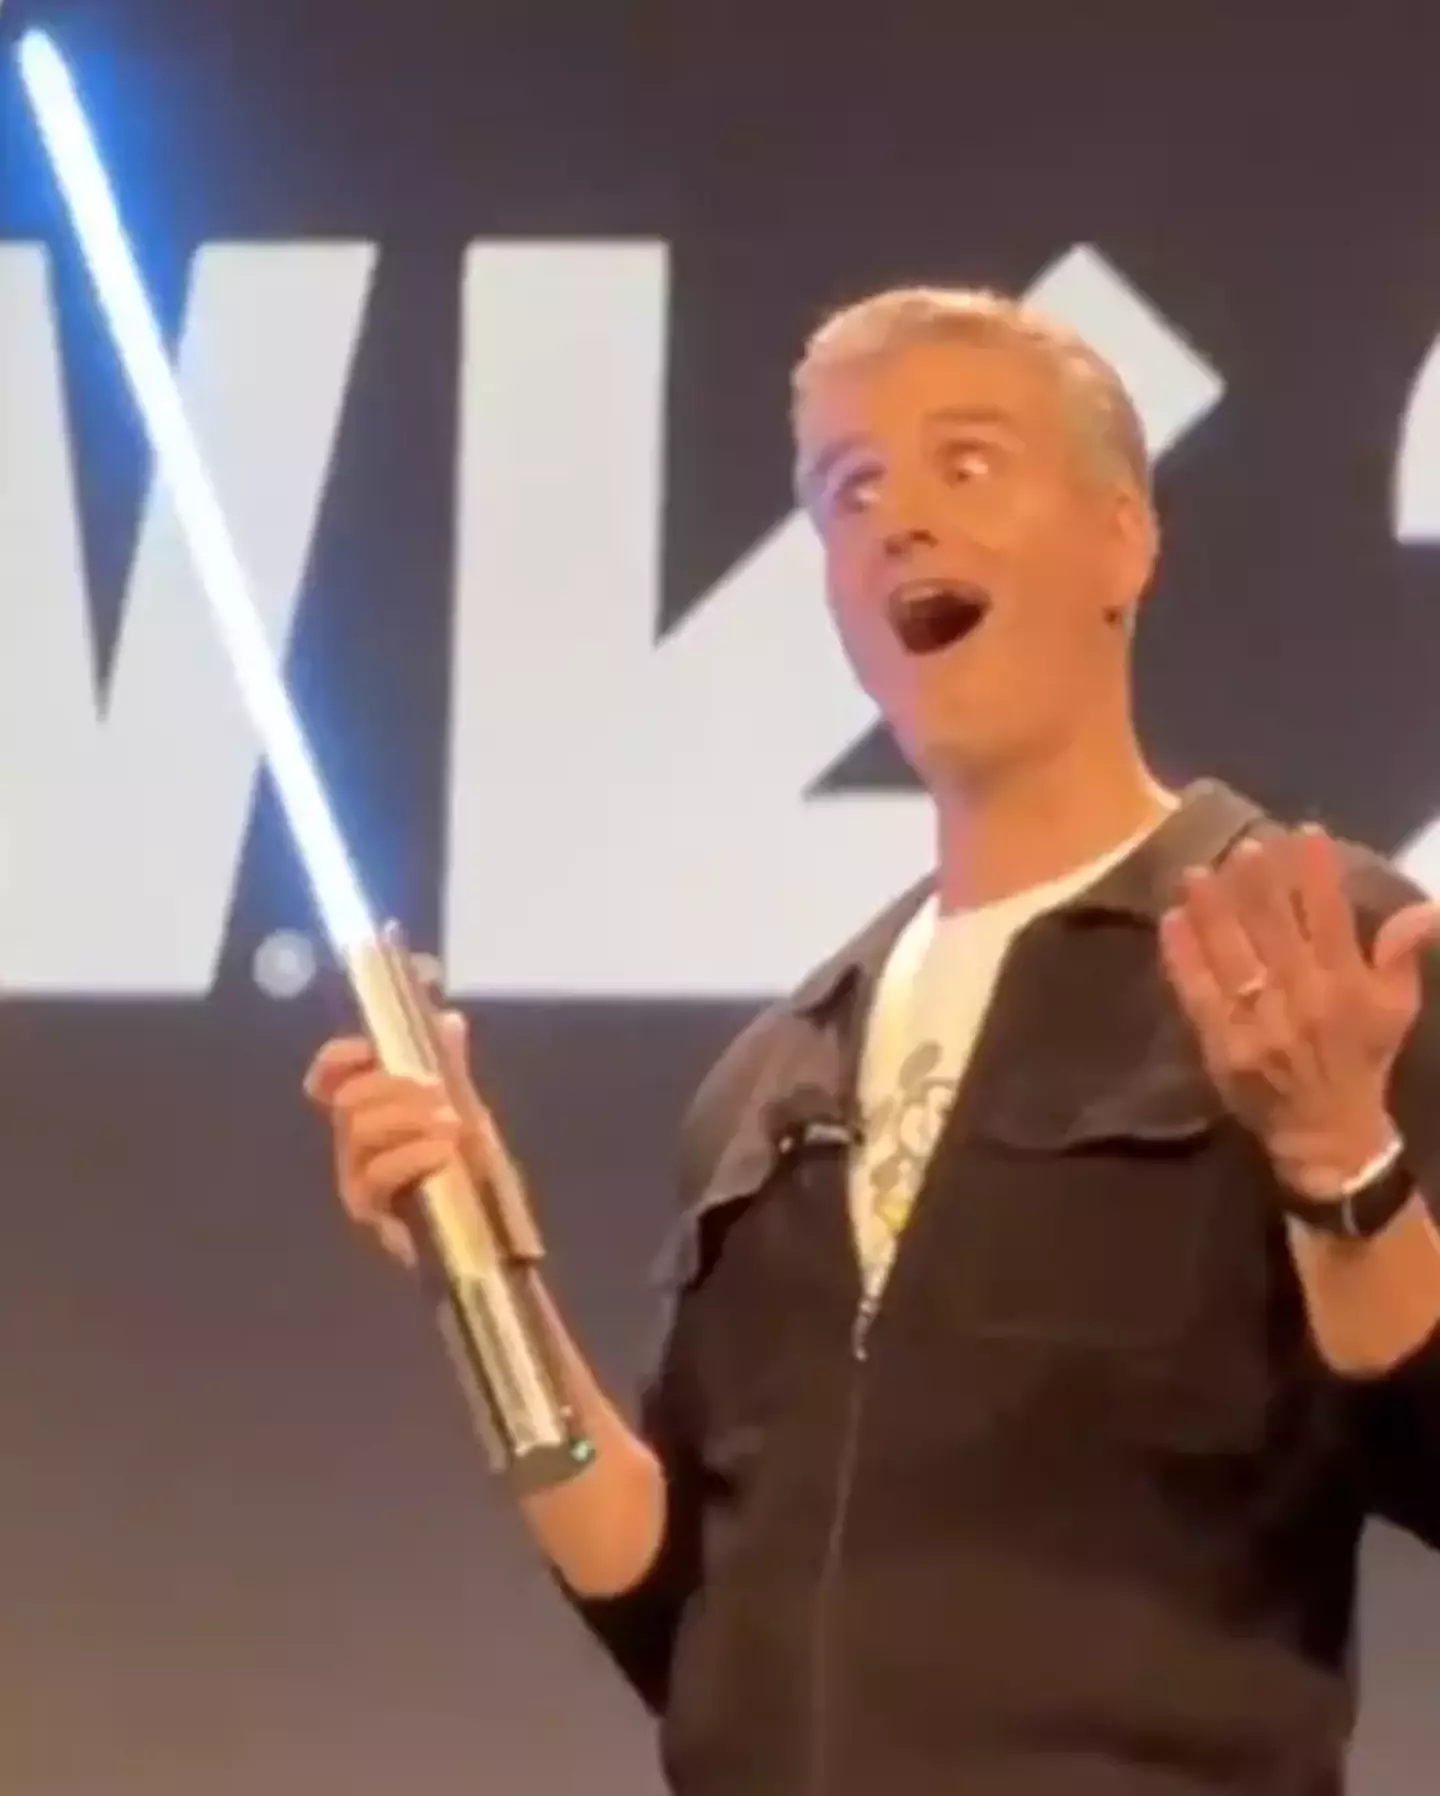 This is the appropriate response for holding a real life lightsaber in your hands.